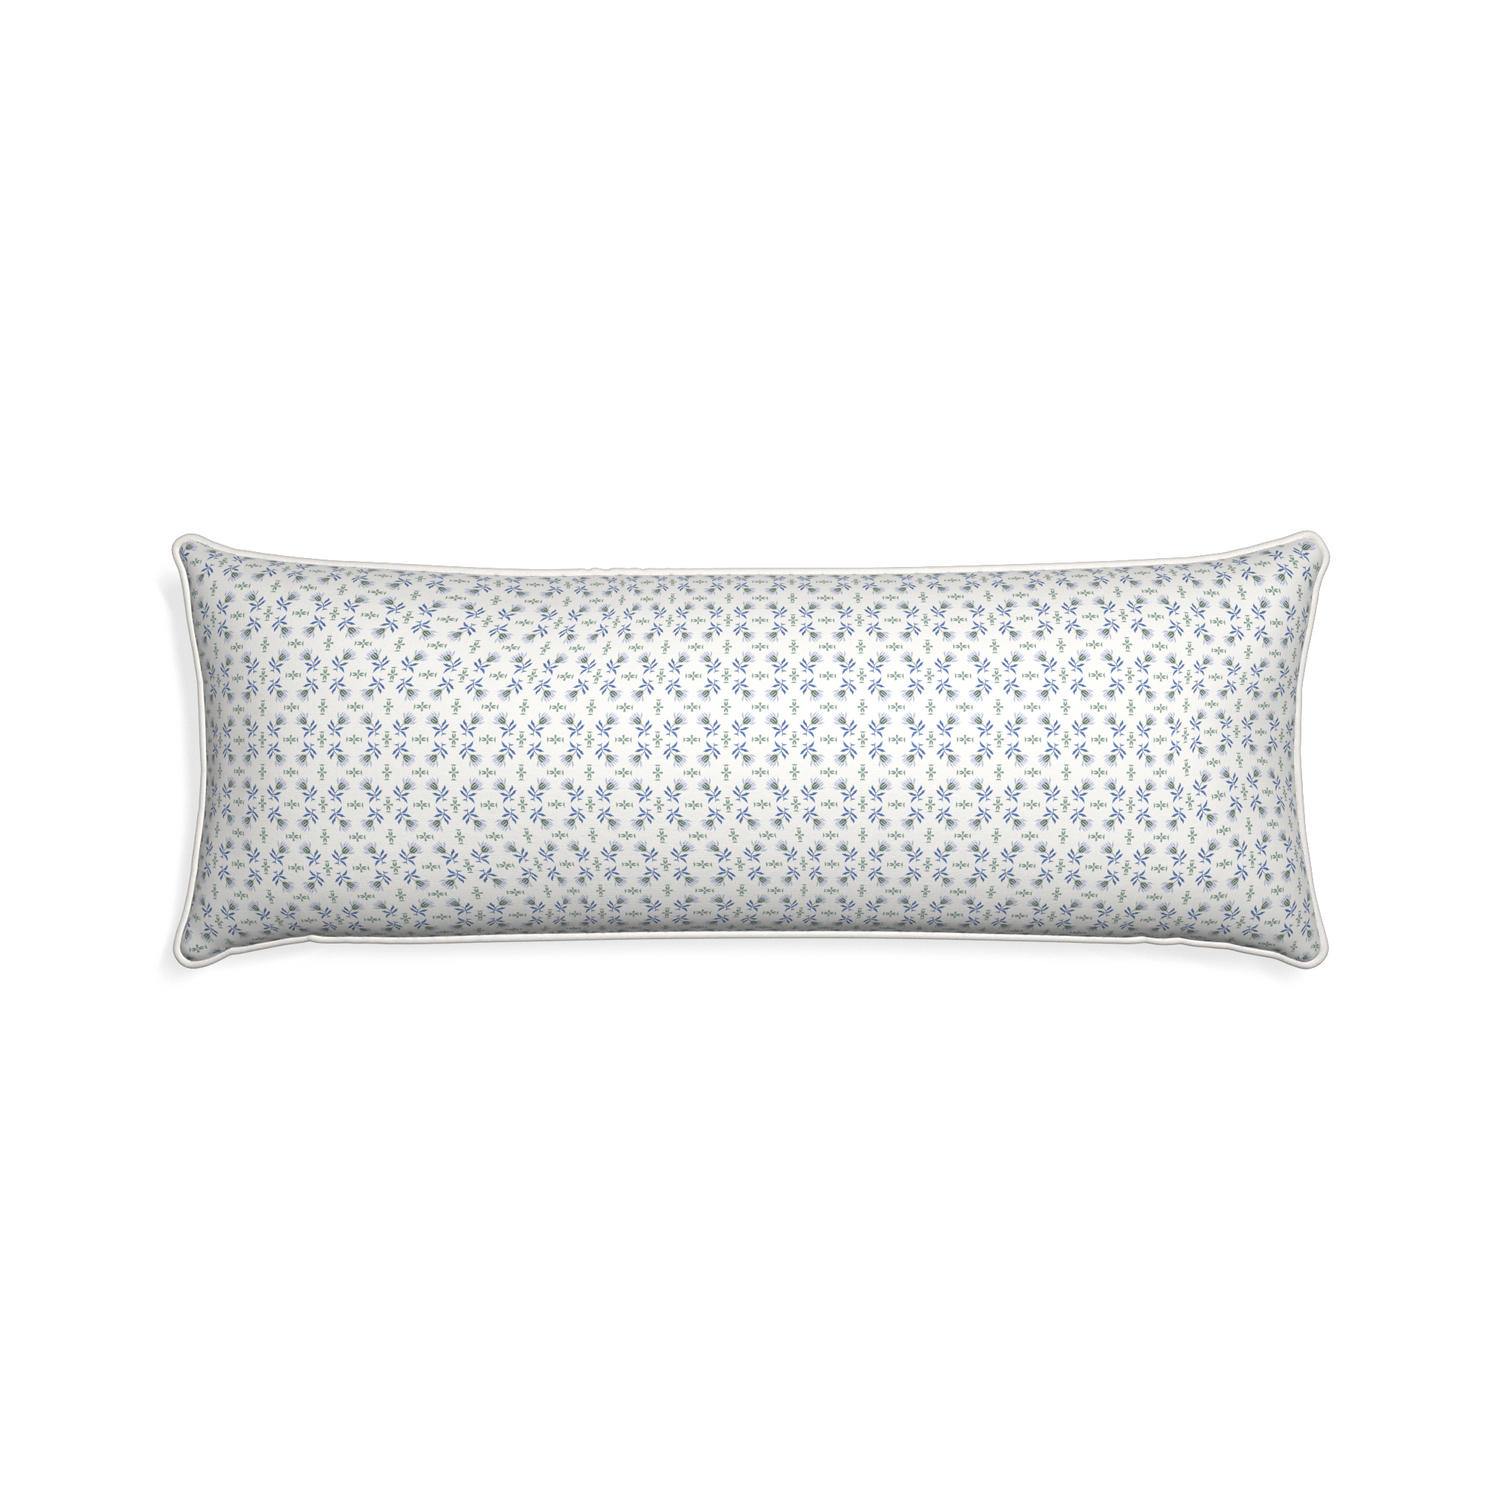 Xl-lumbar lee custom blue & green floralpillow with snow piping on white background